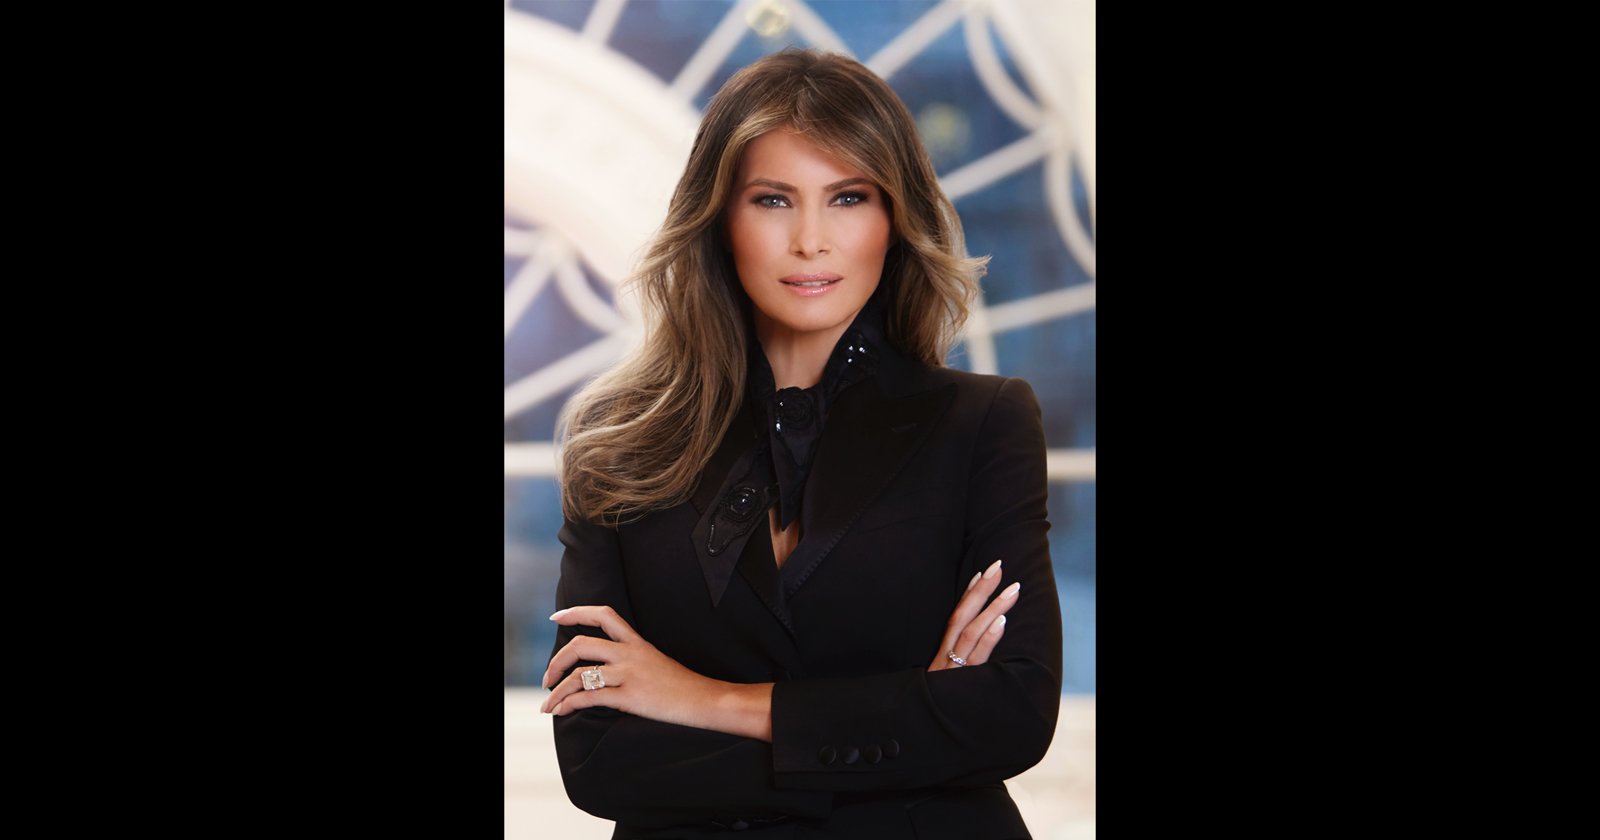 This is First Lady Melania Trumps Official White House Portrait